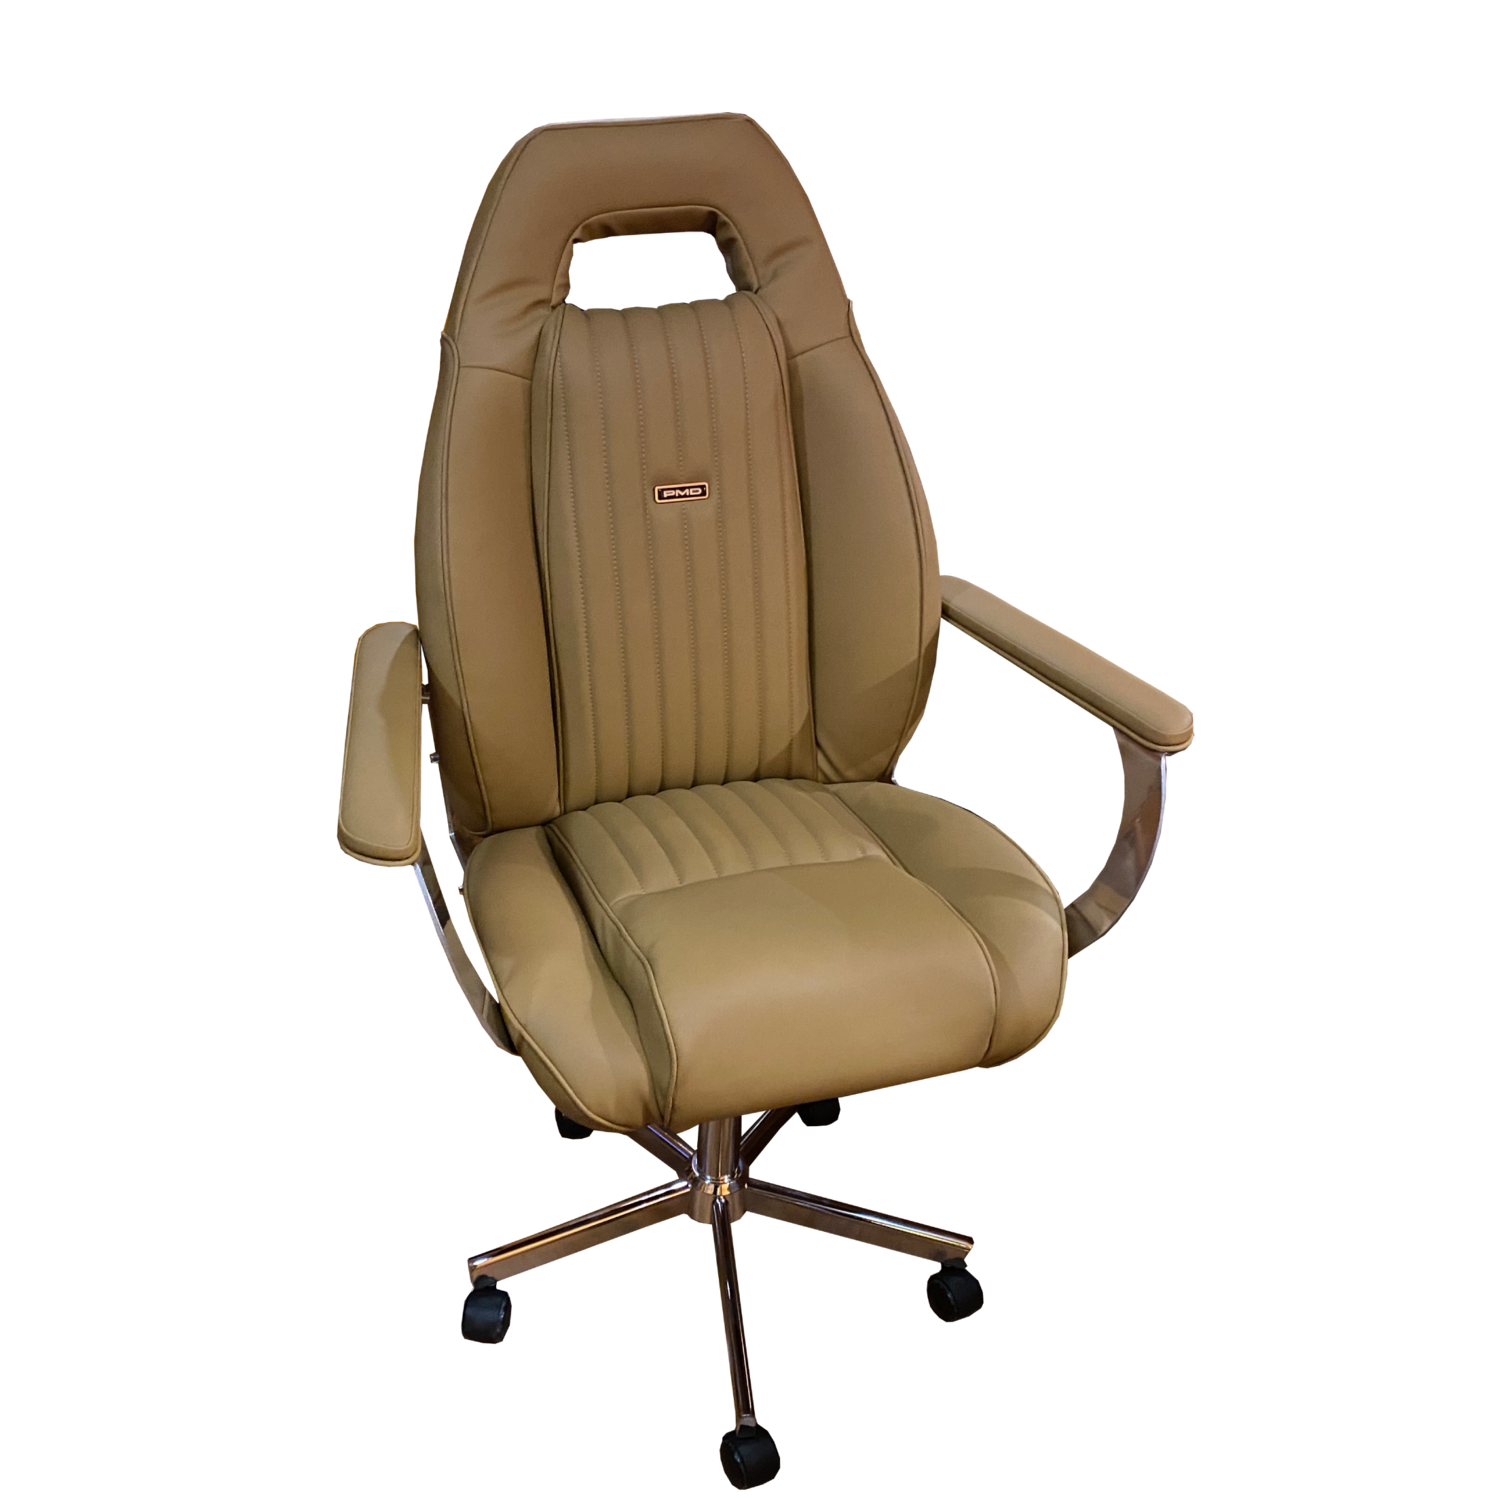 KNIGHT RIDER OFFICE CHAIR (3 left in stock!)